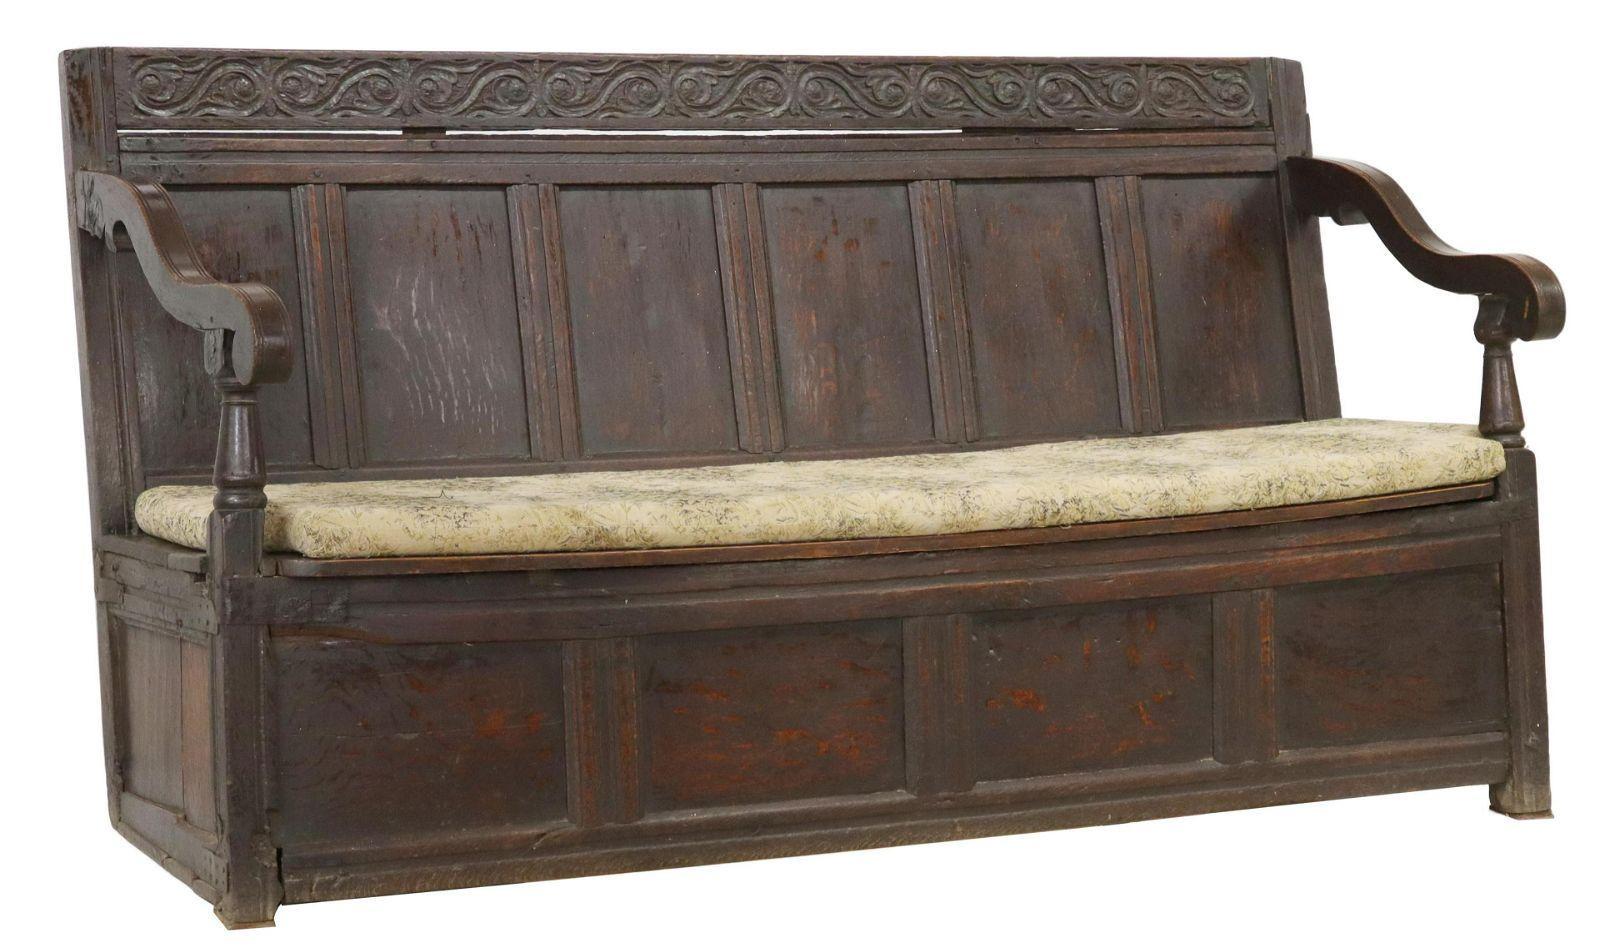 Hand-Crafted English Oak Hall Storage Settle Bench, 18th C. For Sale